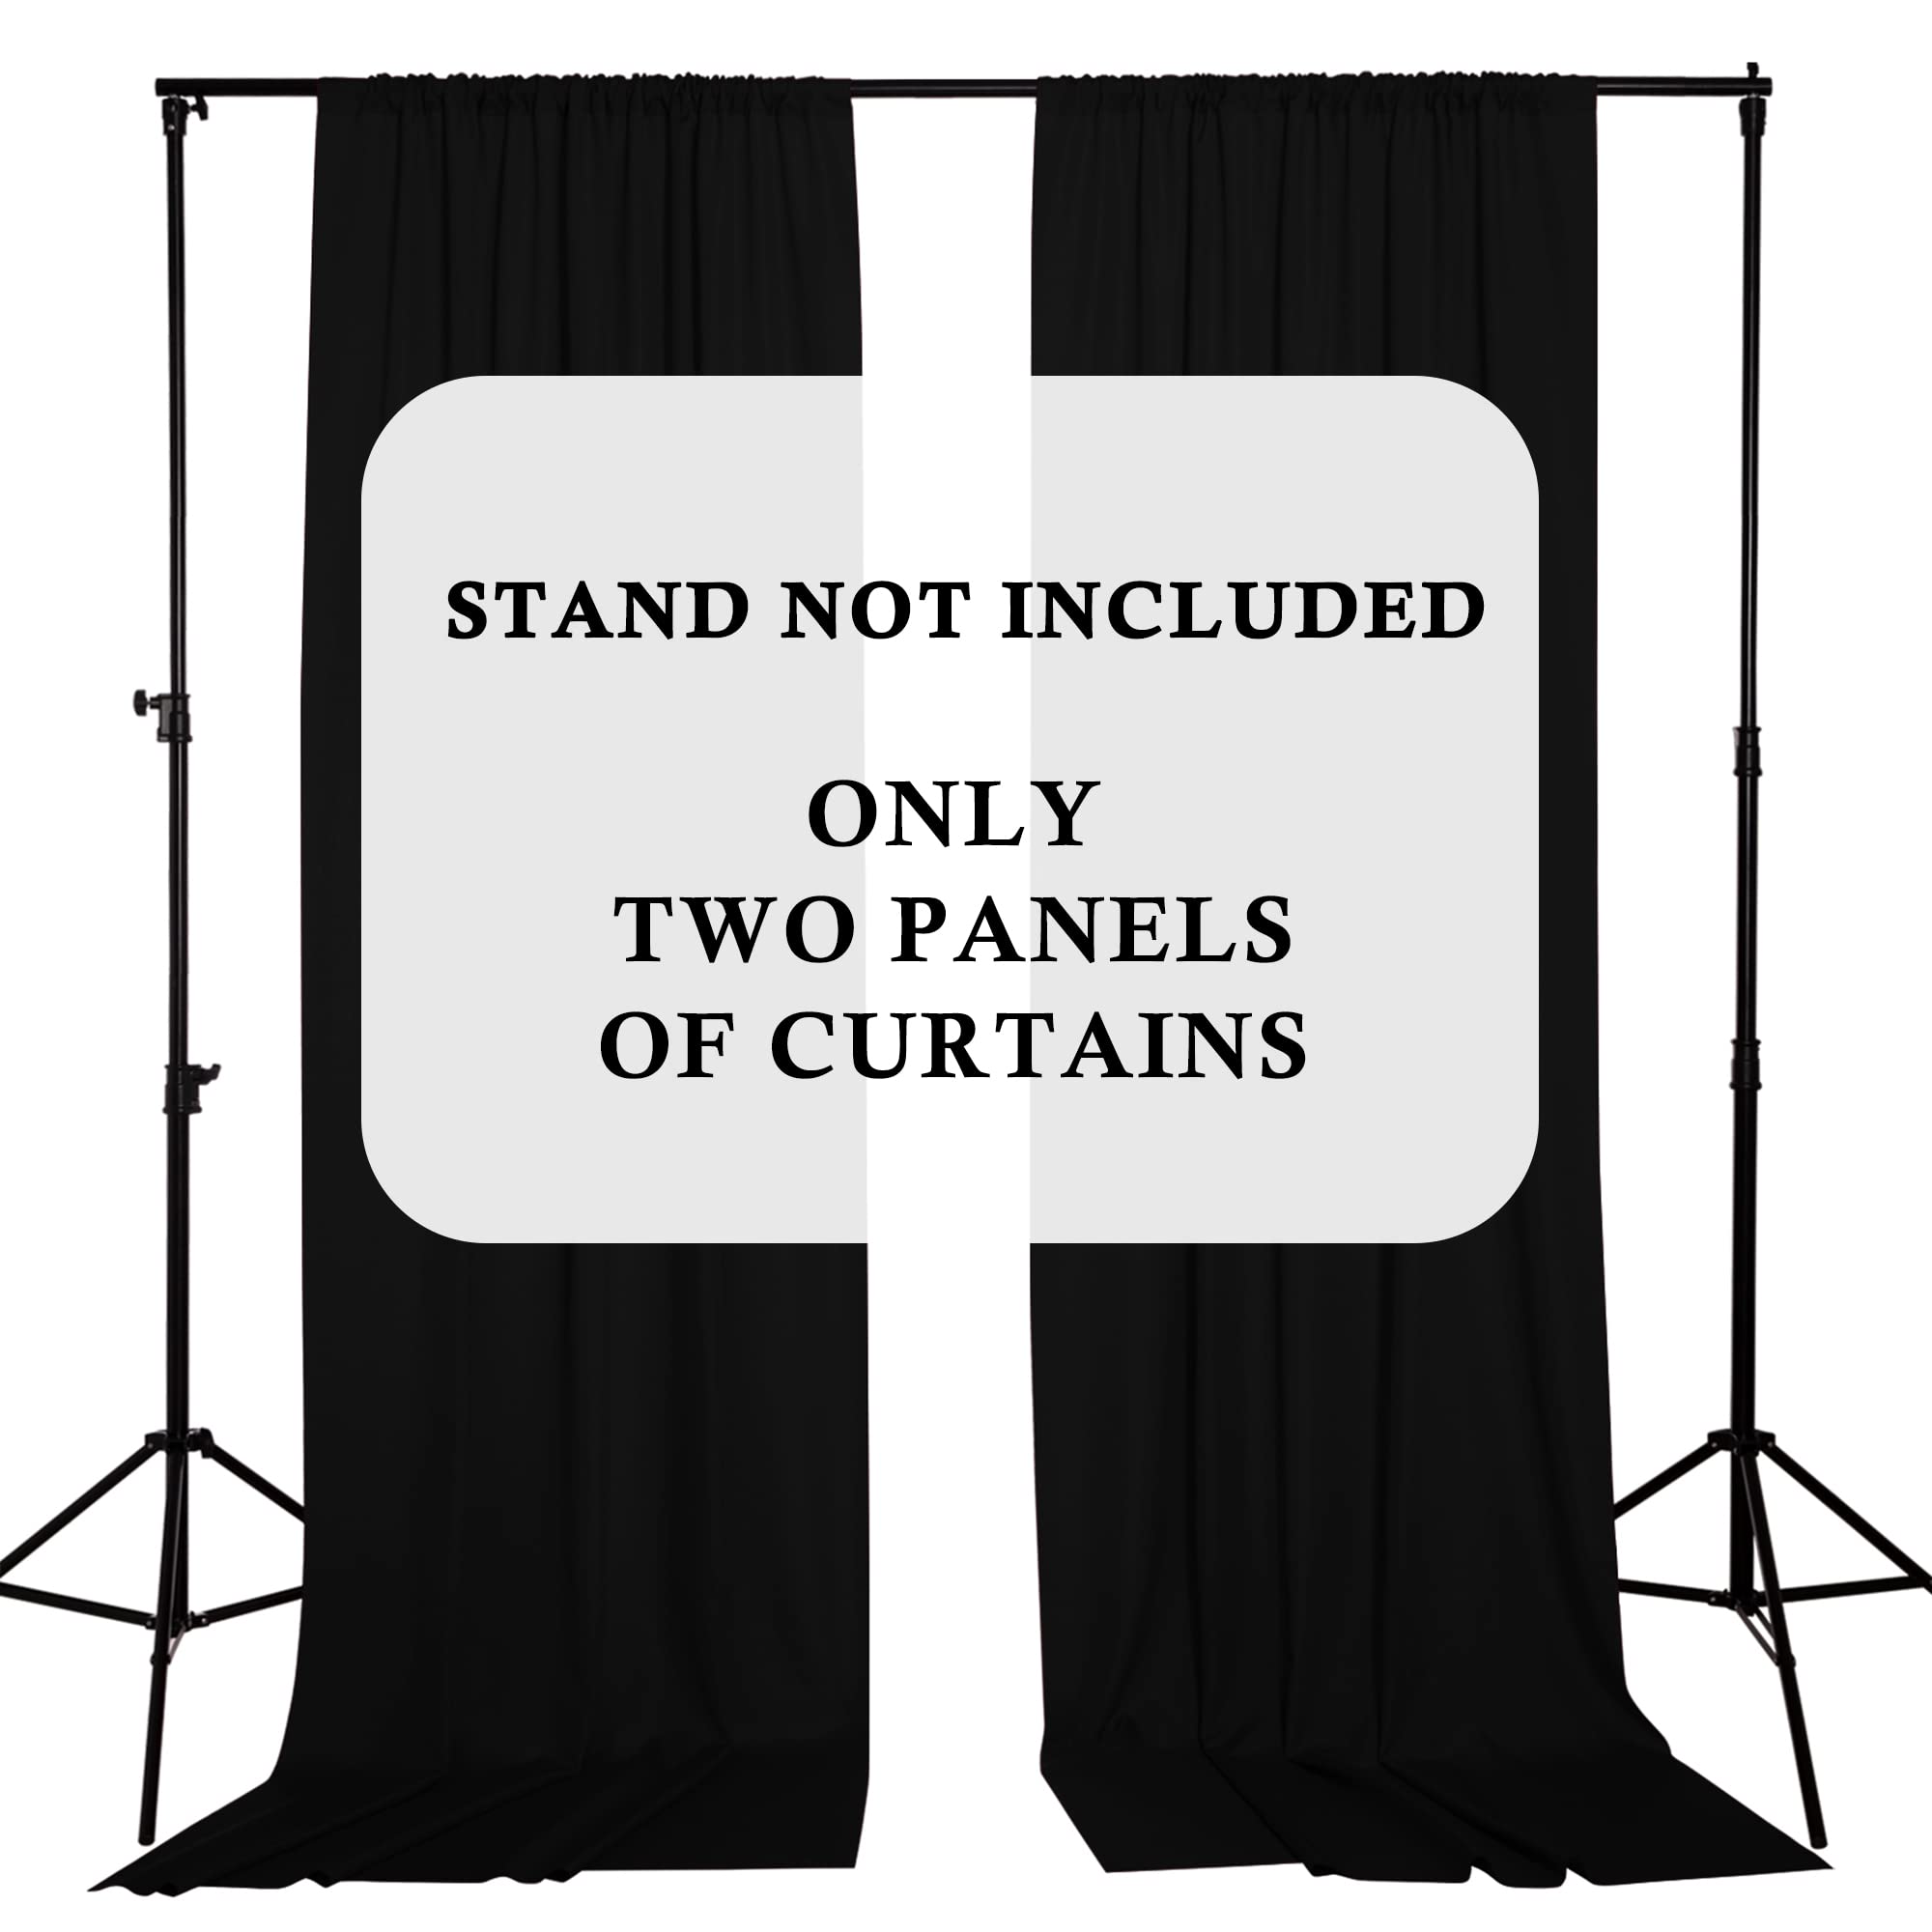 StangH Black Backdrop Curtains for Parties - 10 ft Curtain Drapes for Partition Room Dividers Curtains Waterproof Home Theater Studio Backgrounds Wedding Stage Stand Panels, 2 Panels